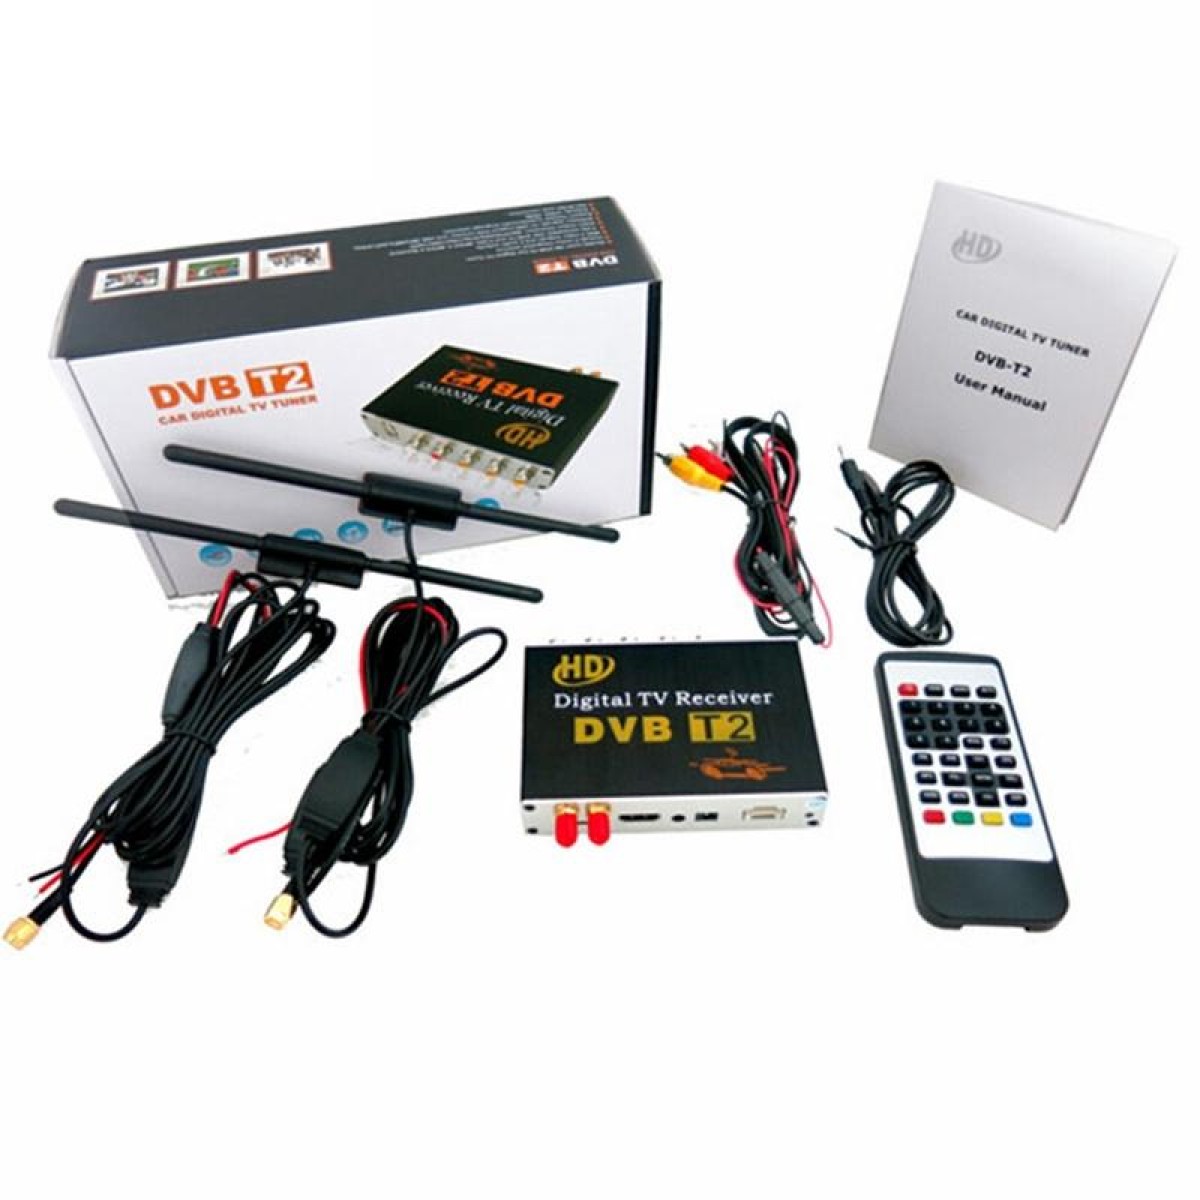 High Speed 90km/h H.264 / AVC MPEG4 Mobile Digital Car DVB-T2 TV Receiver, Suit for Europe / Singapore / Thailand / Africa ect. Market(Black)